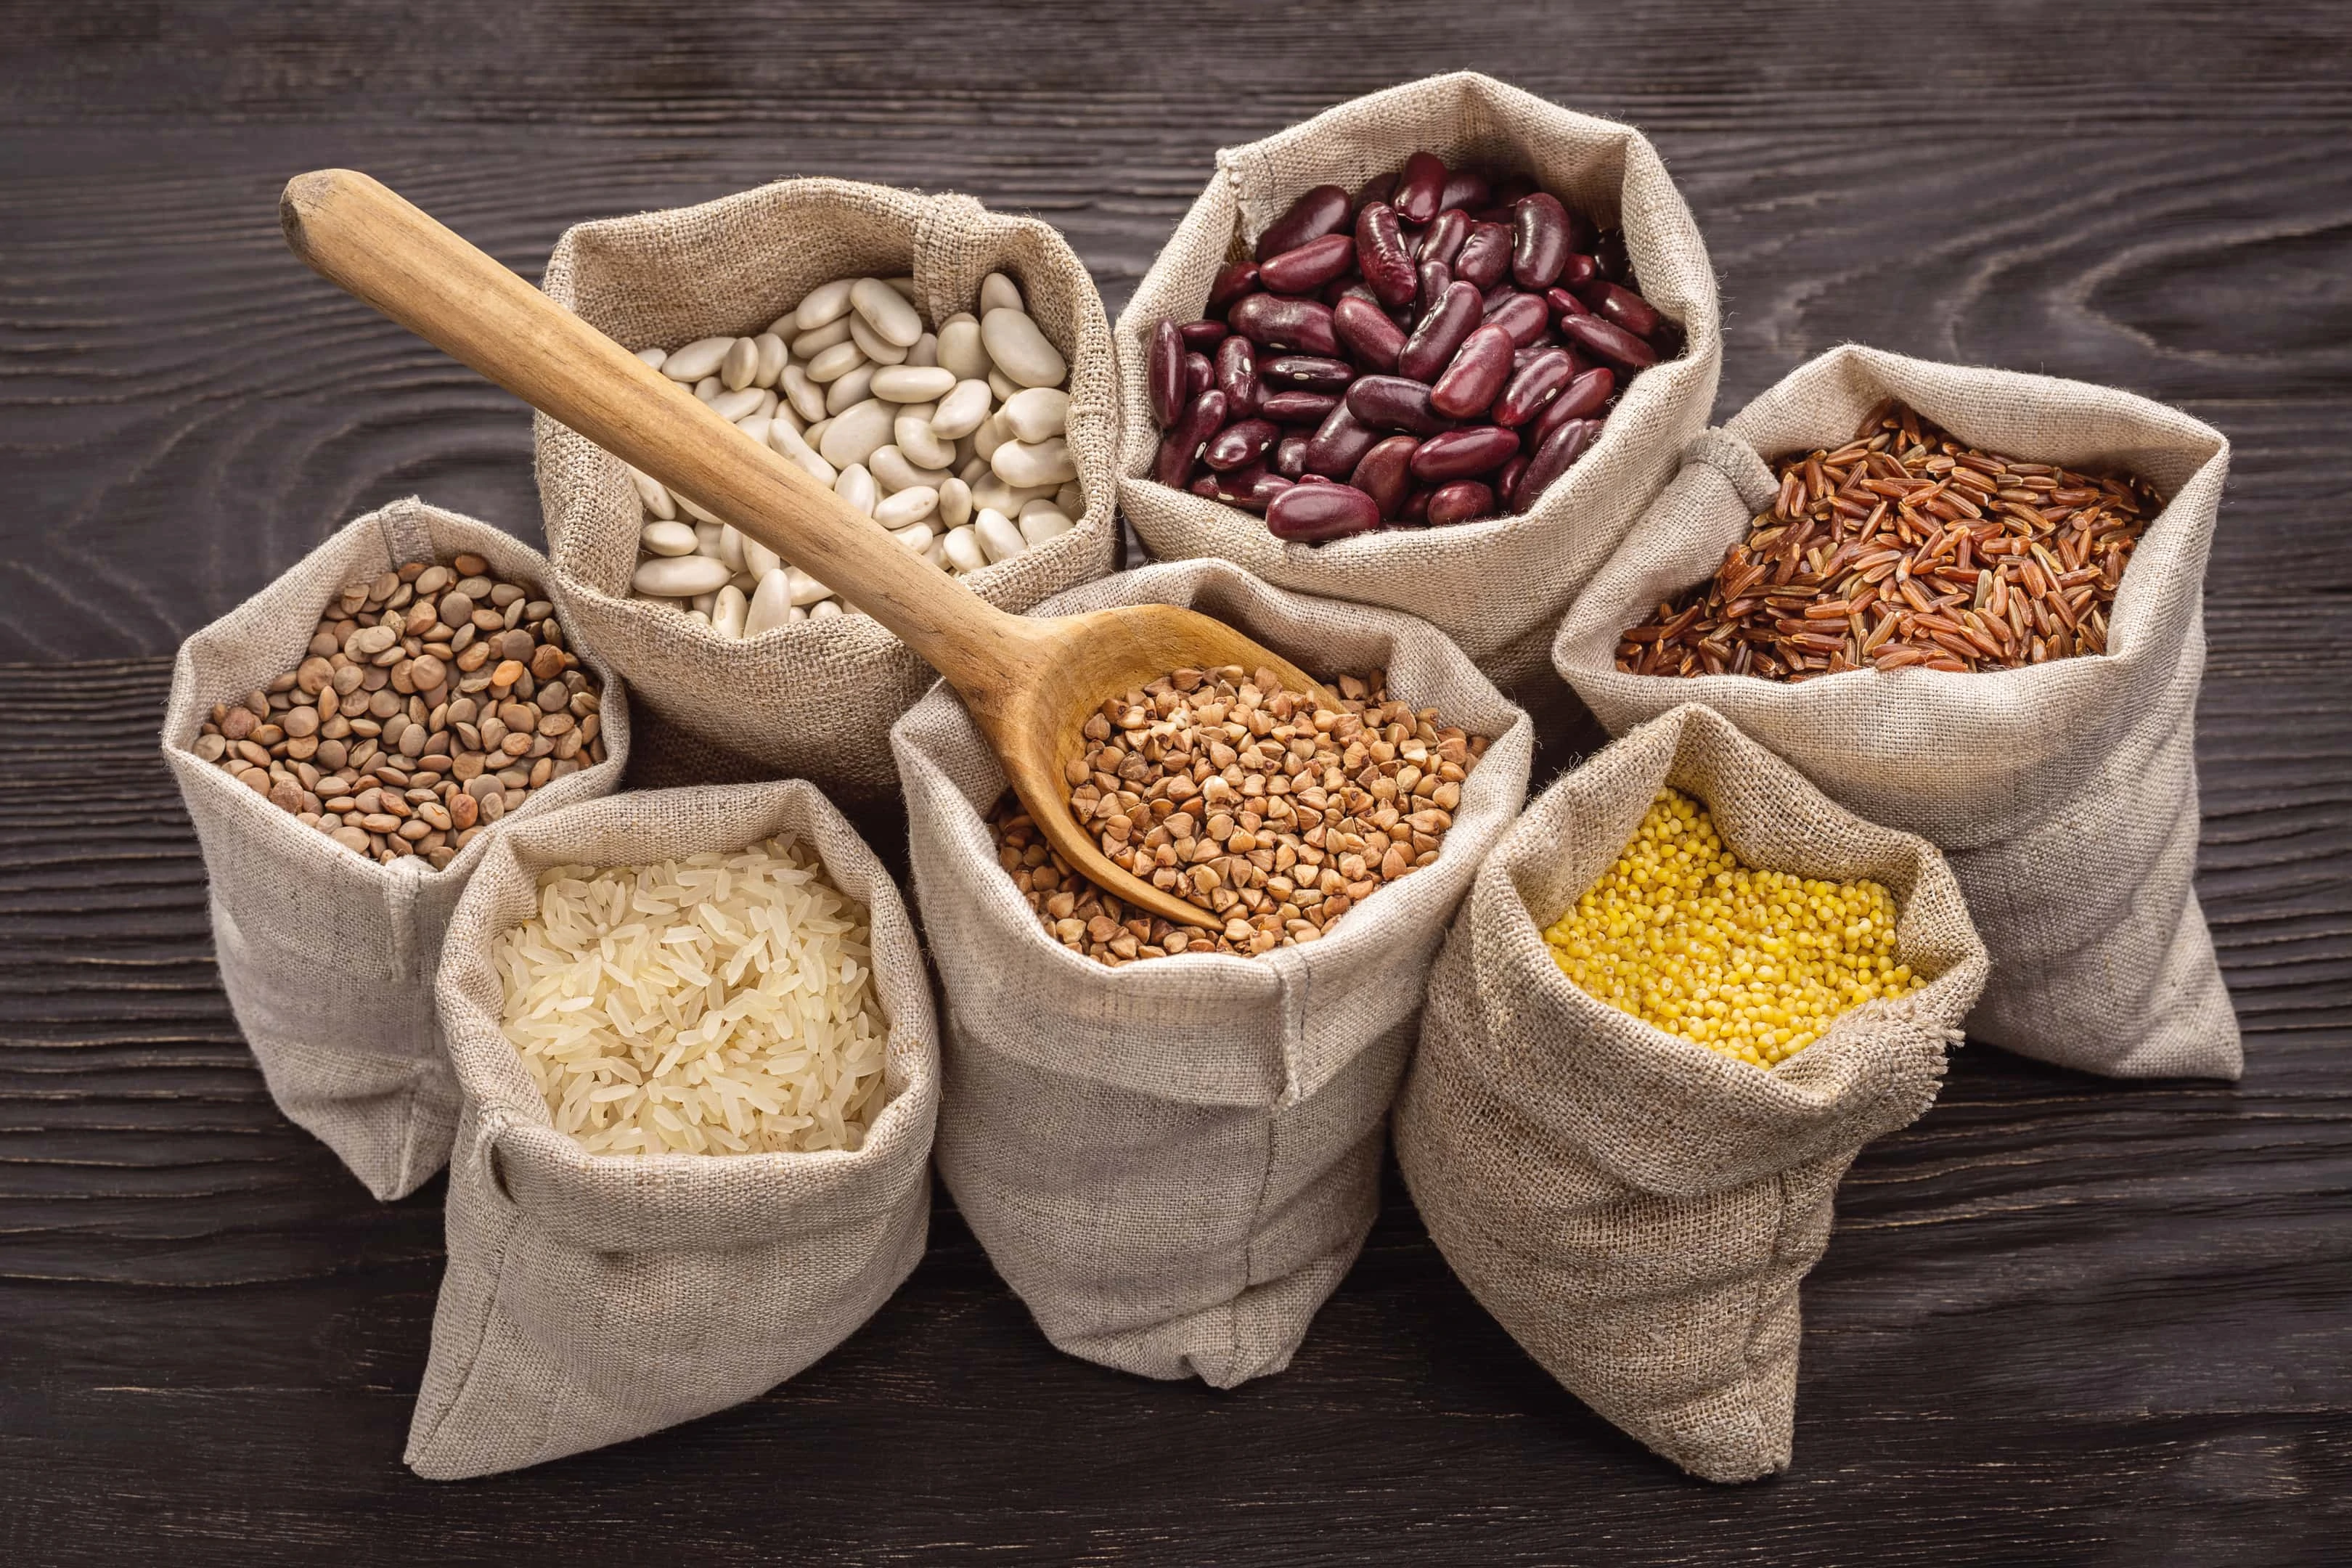 Beans and legumes in bags on wooden background